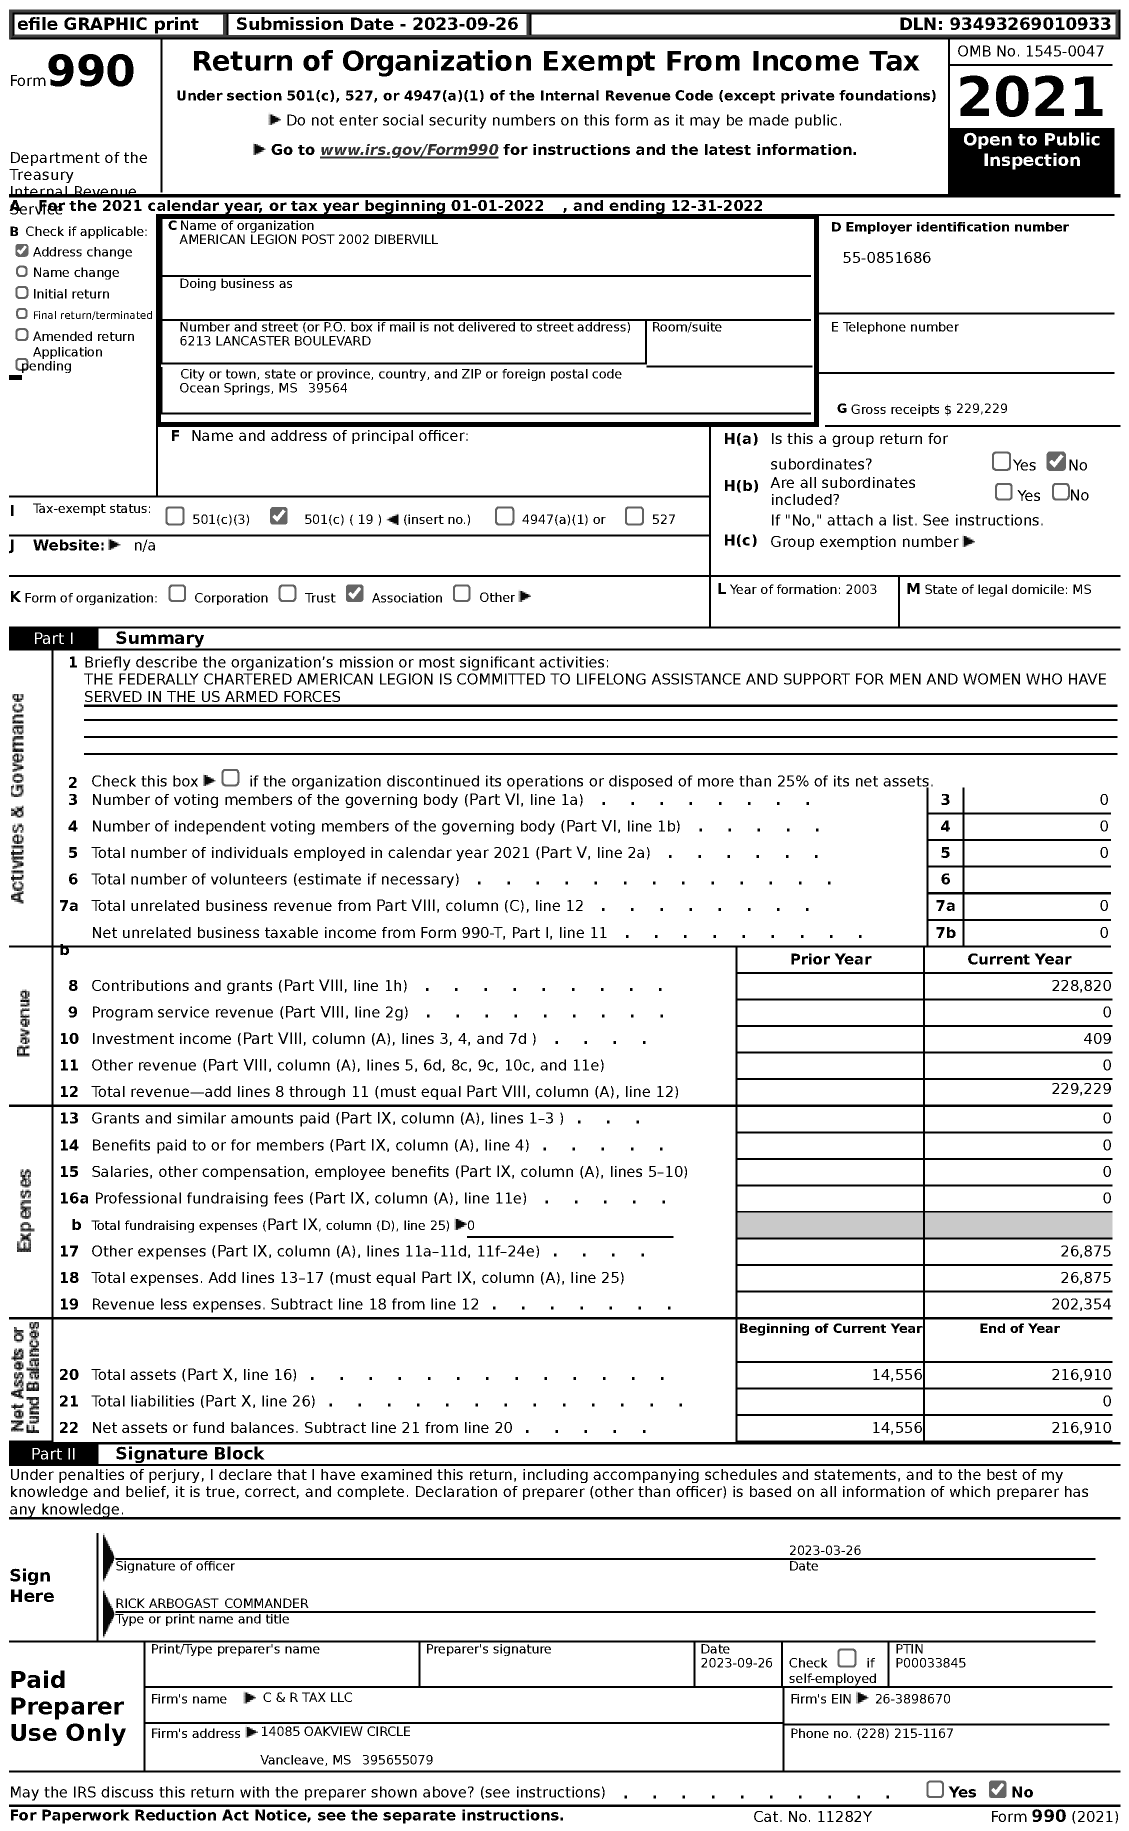 Image of first page of 2022 Form 990 for American Legion Post 2002 Dibervill